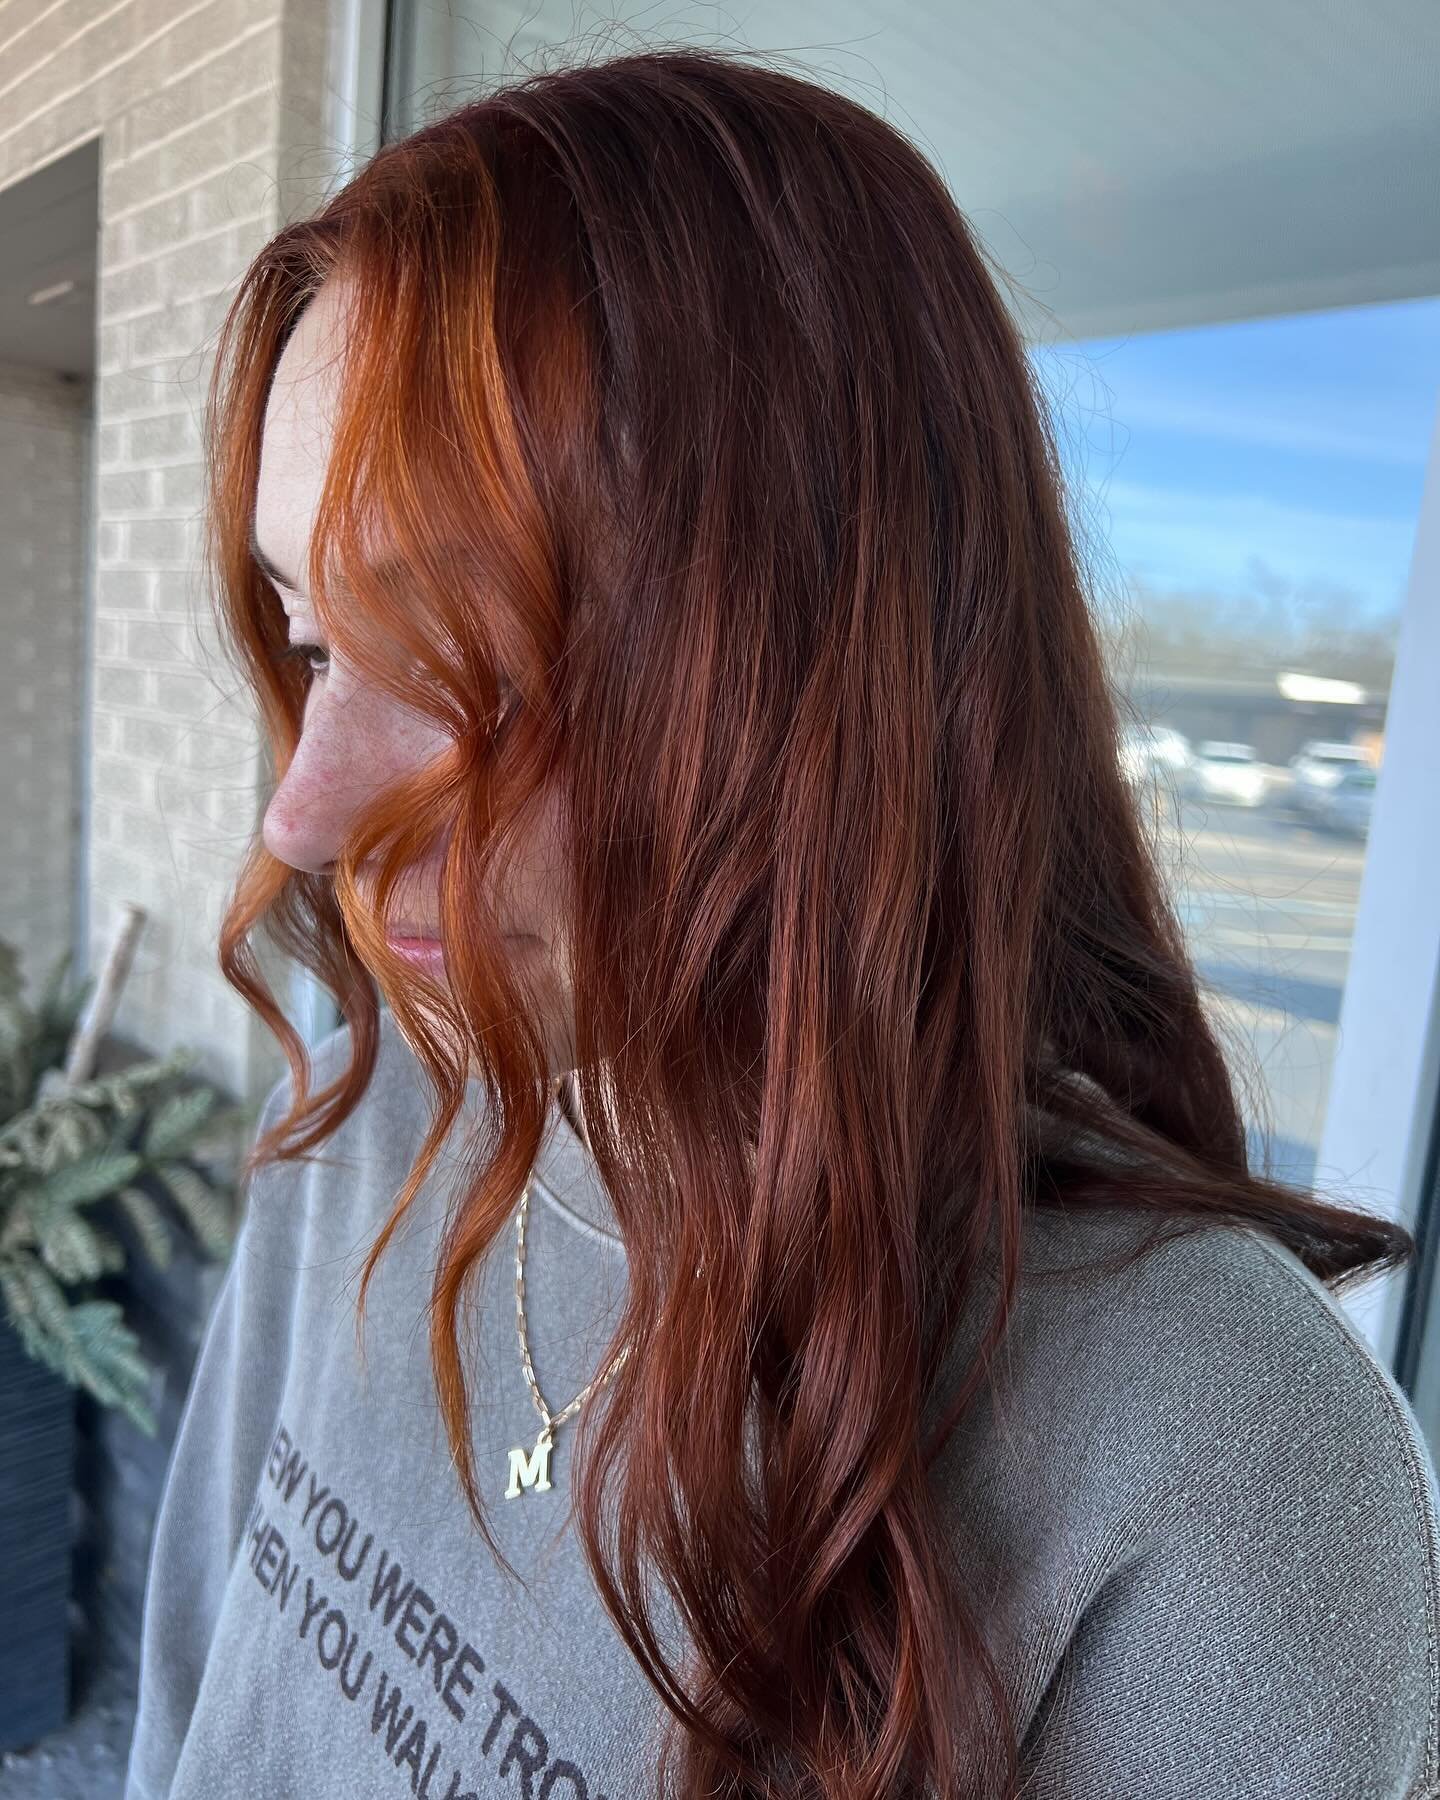 Loved how the copper turned out for this sweet soul! The money piece brings this all together!!
-
-
-
-
-
-
#cosmetology #cosstudent #copper #hair #haircolor #moneypiece